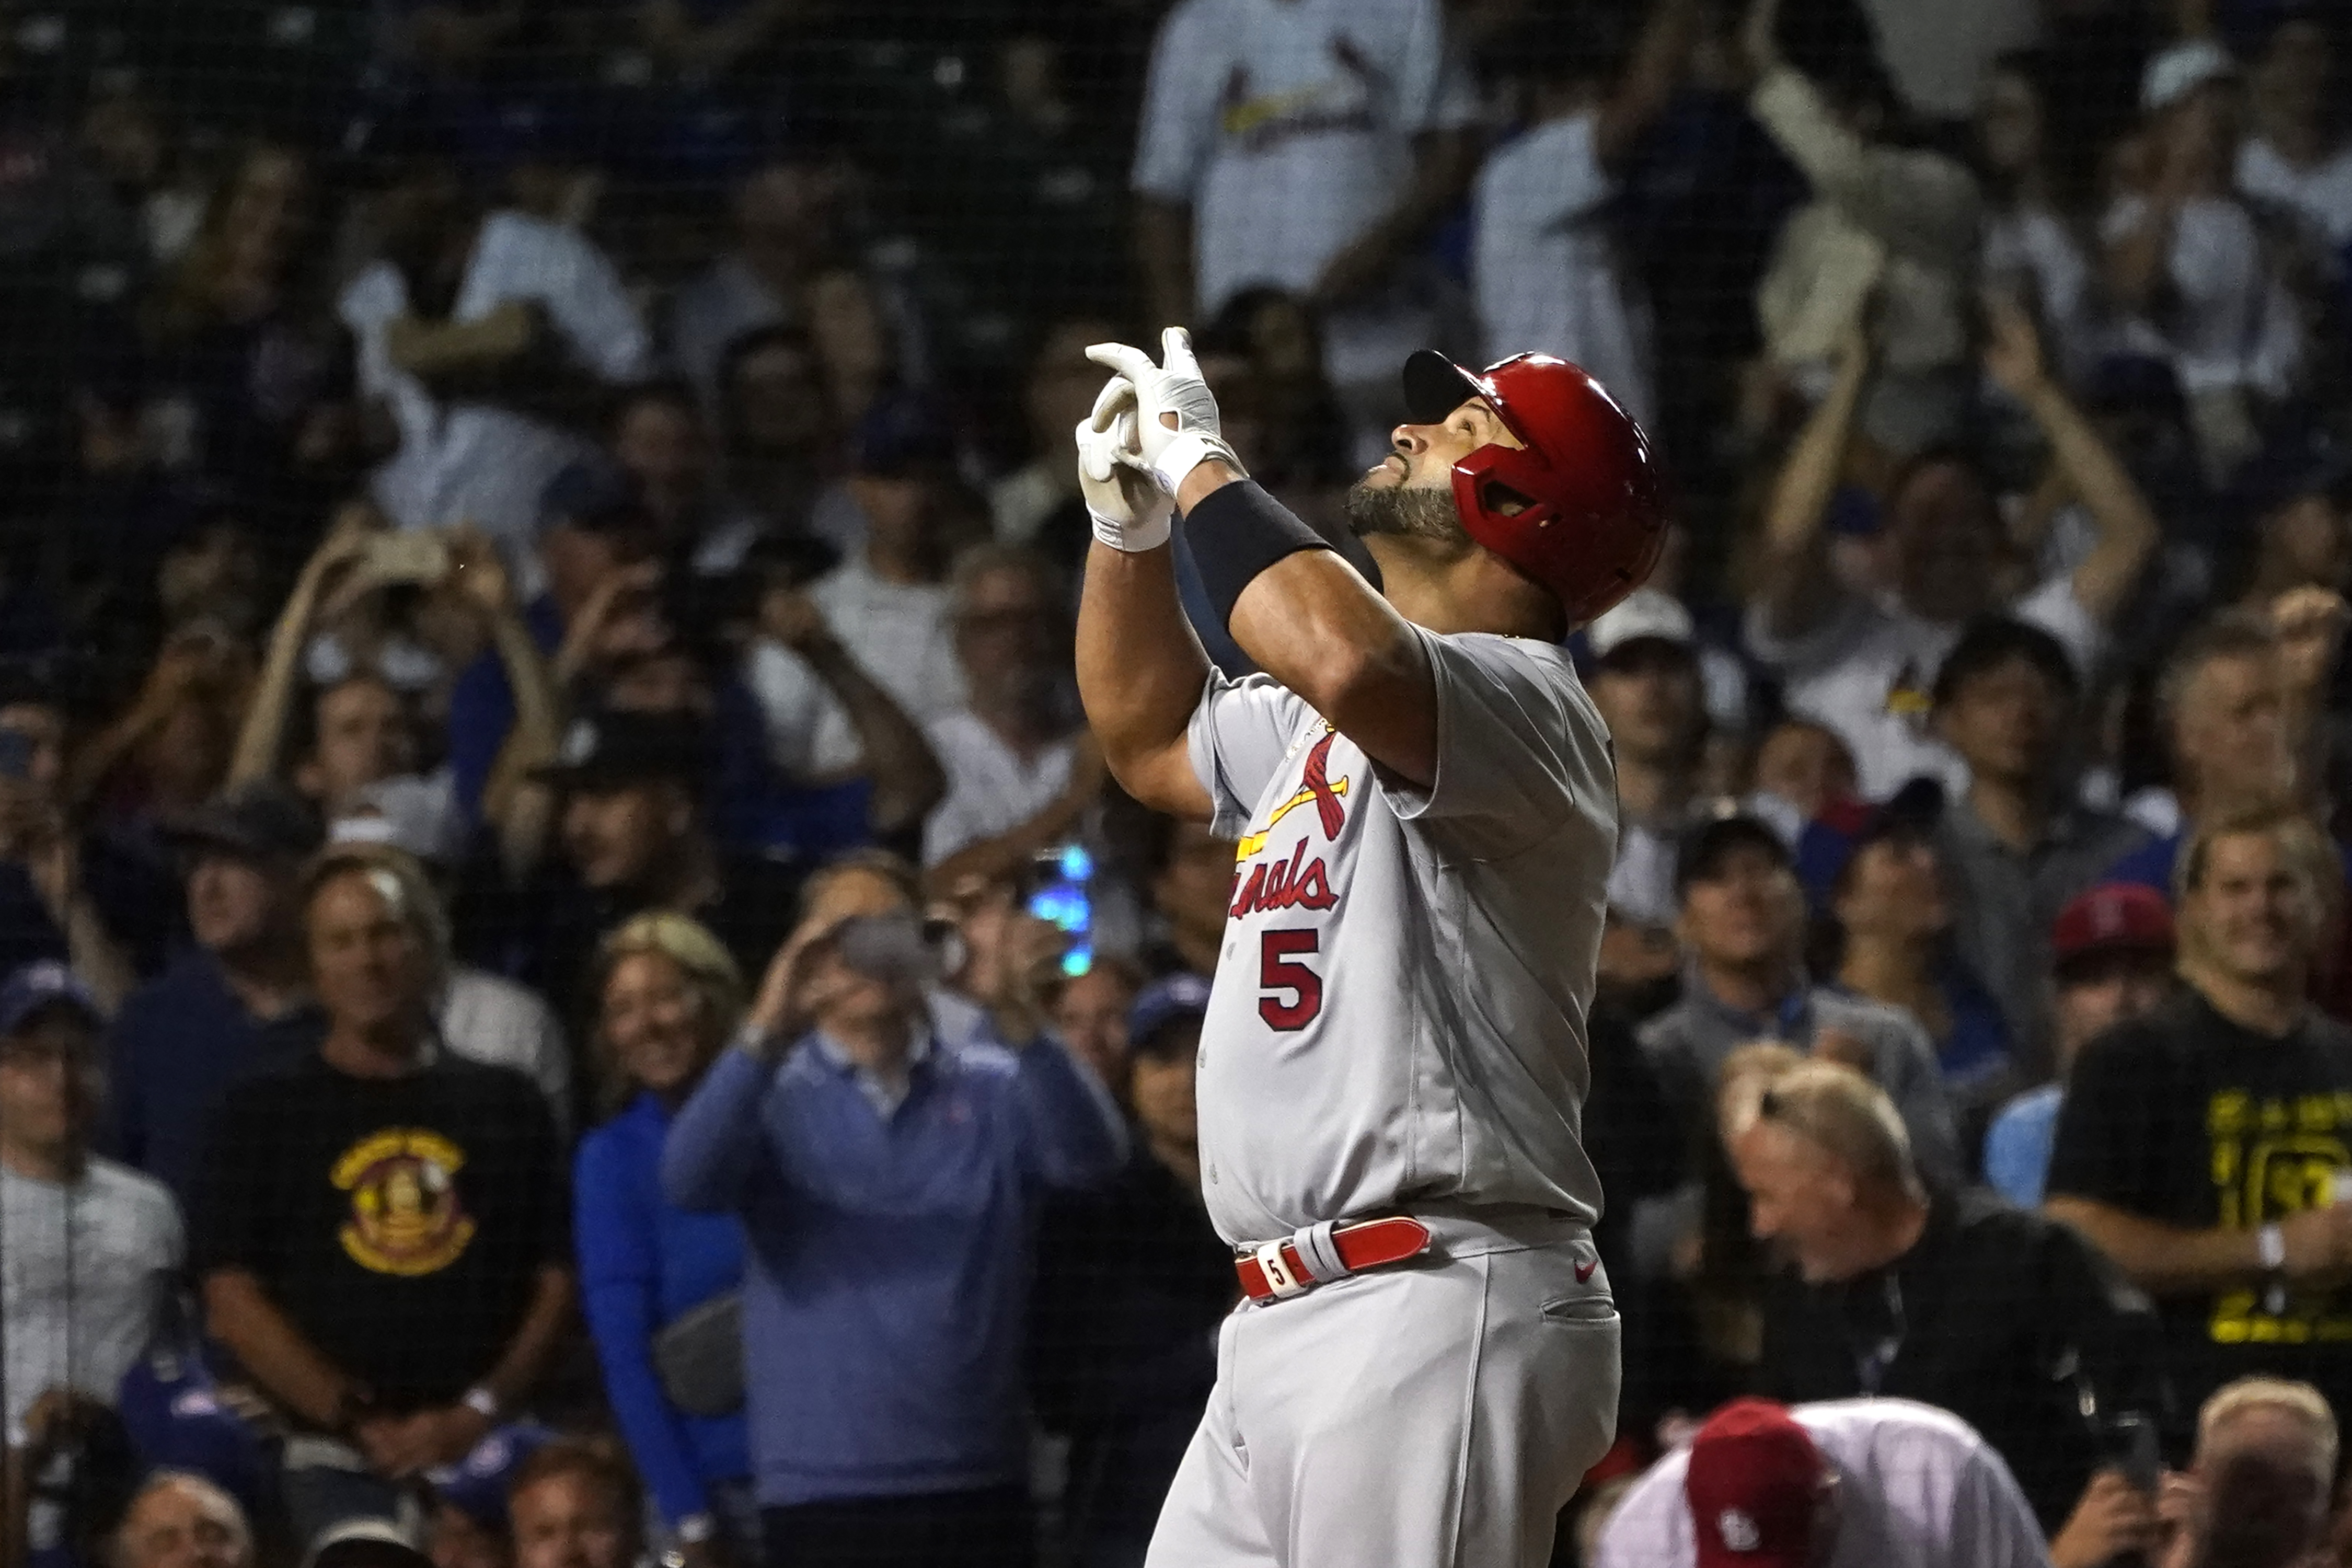 Albert Pujols surprised a young Cardinals fan by giving away jersey